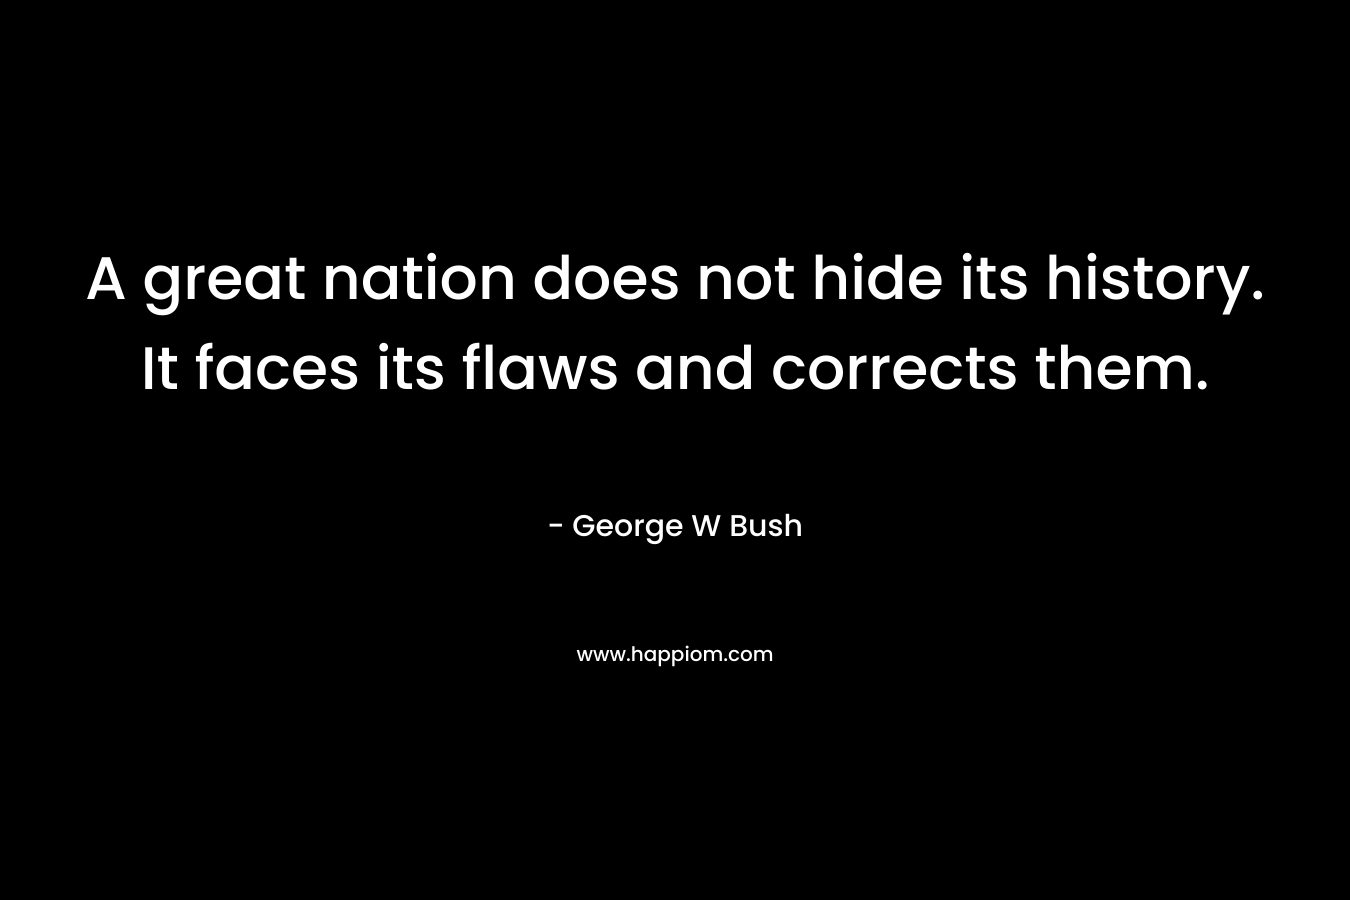 A great nation does not hide its history. It faces its flaws and corrects them.